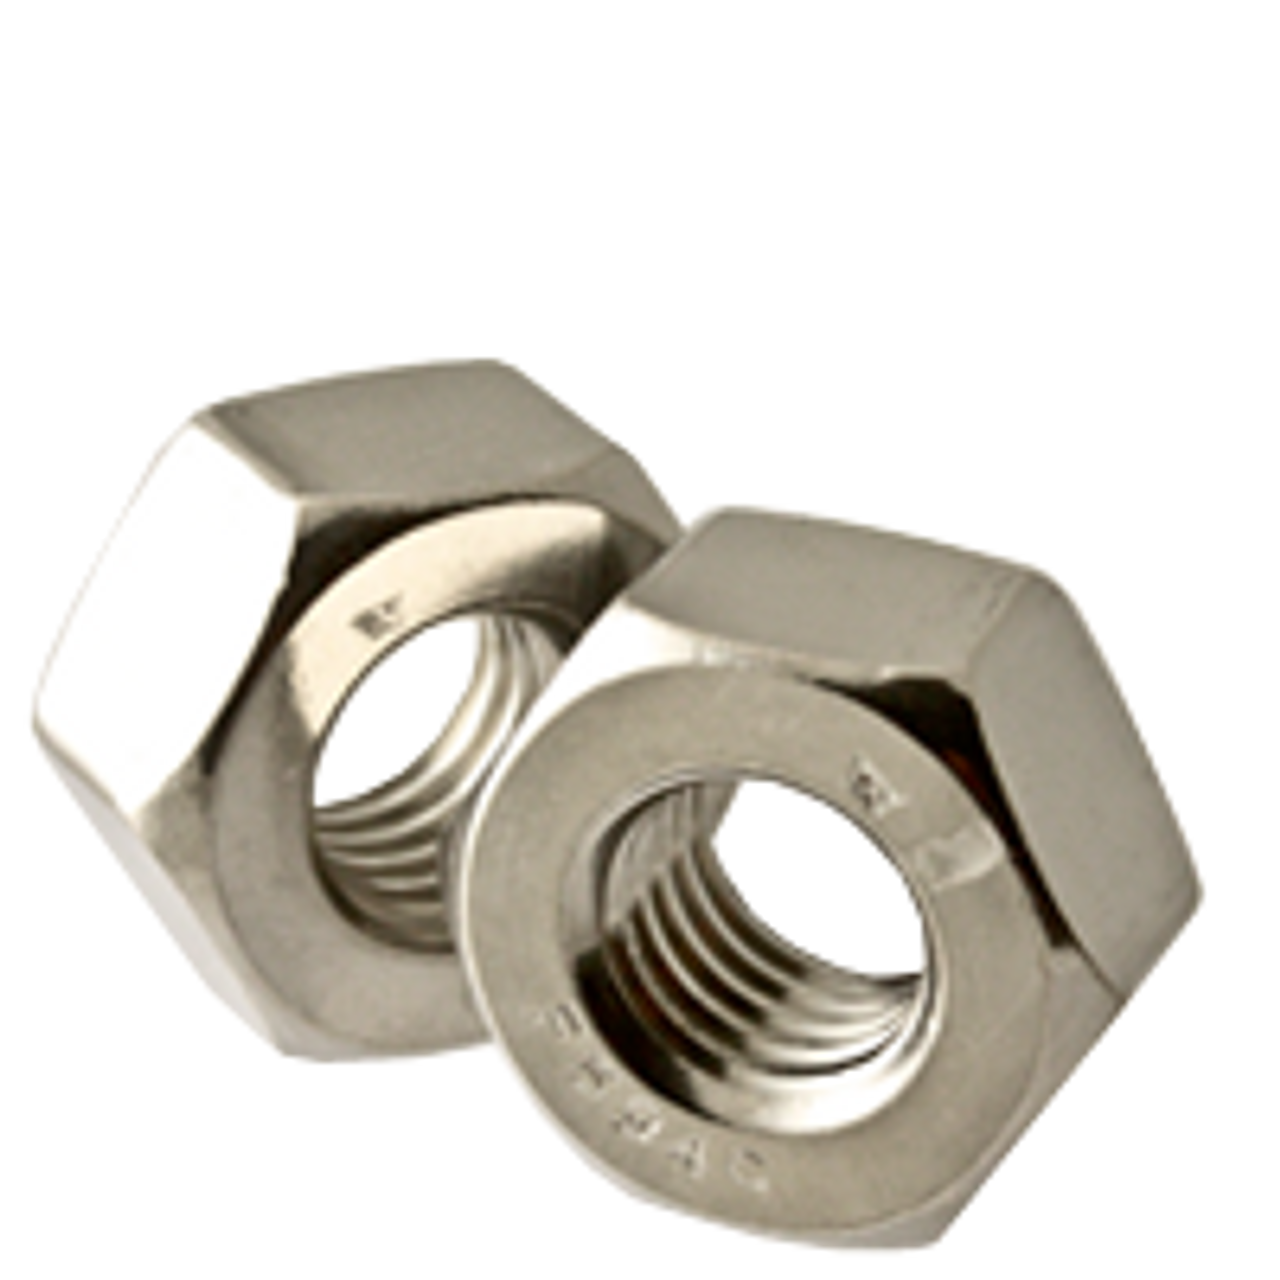 1/2-13 Heavy Hex Nuts Stainless Steel